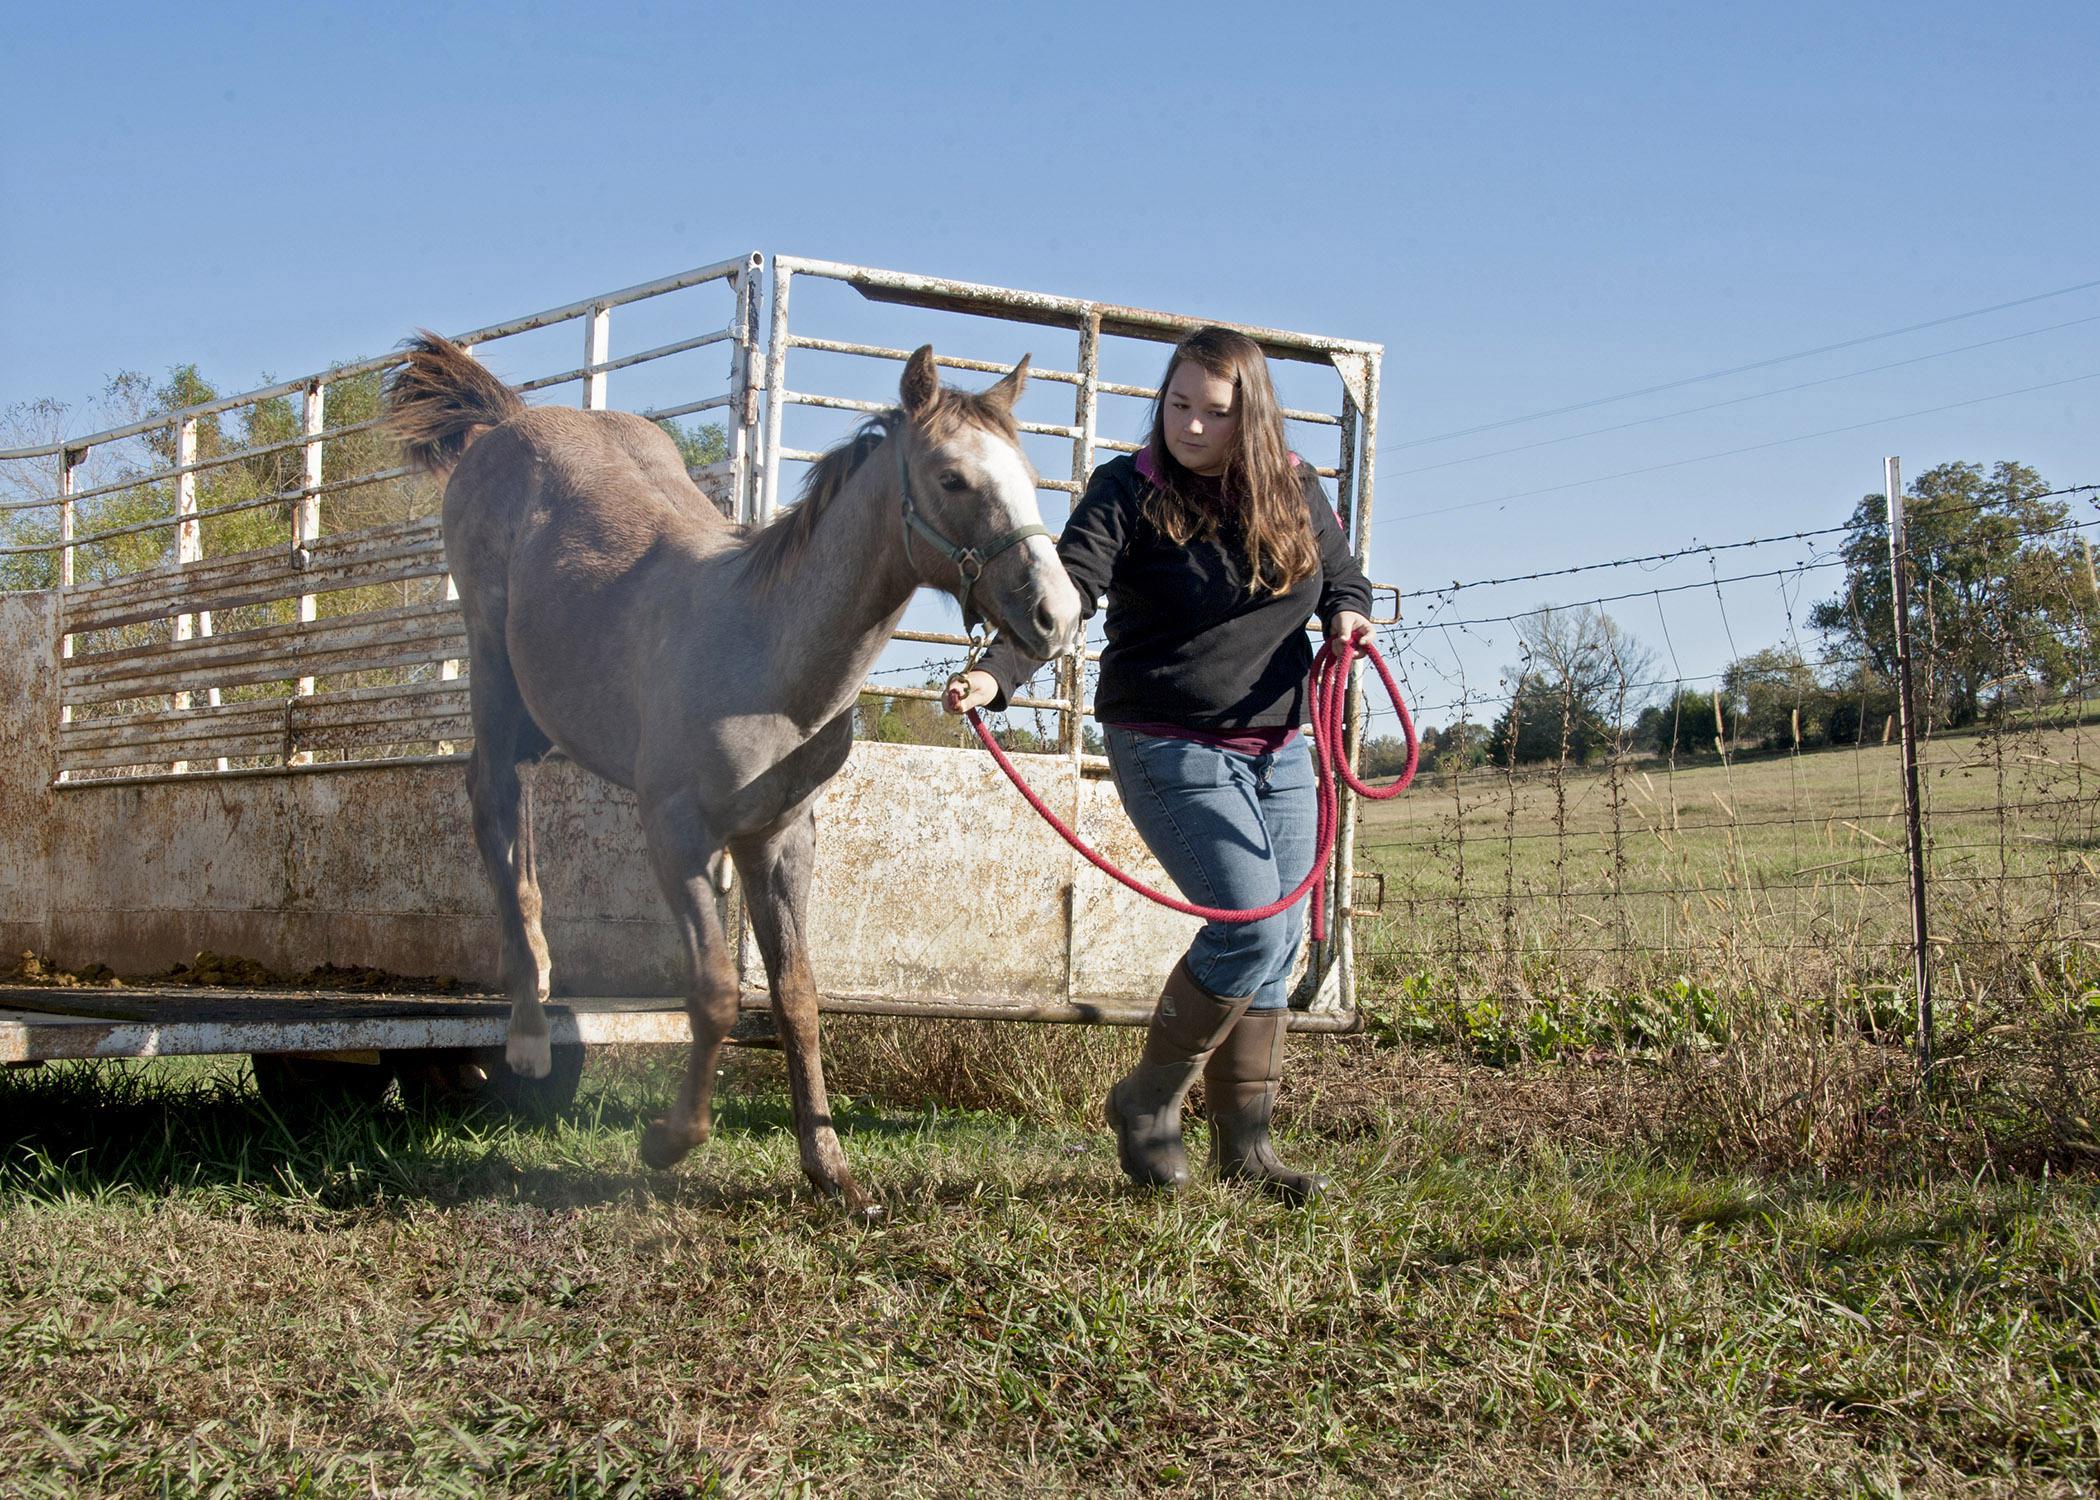 Callie Cornelison of Scottsboro, Ala., a senior studying animal and dairy sciences at Mississippi State University, practices loading and unloading from a trailer with Leroy, a horse up for bid in an online auction running Nov. 1-21. (Photo by MSU Ag Communications/Kat Lawrence)